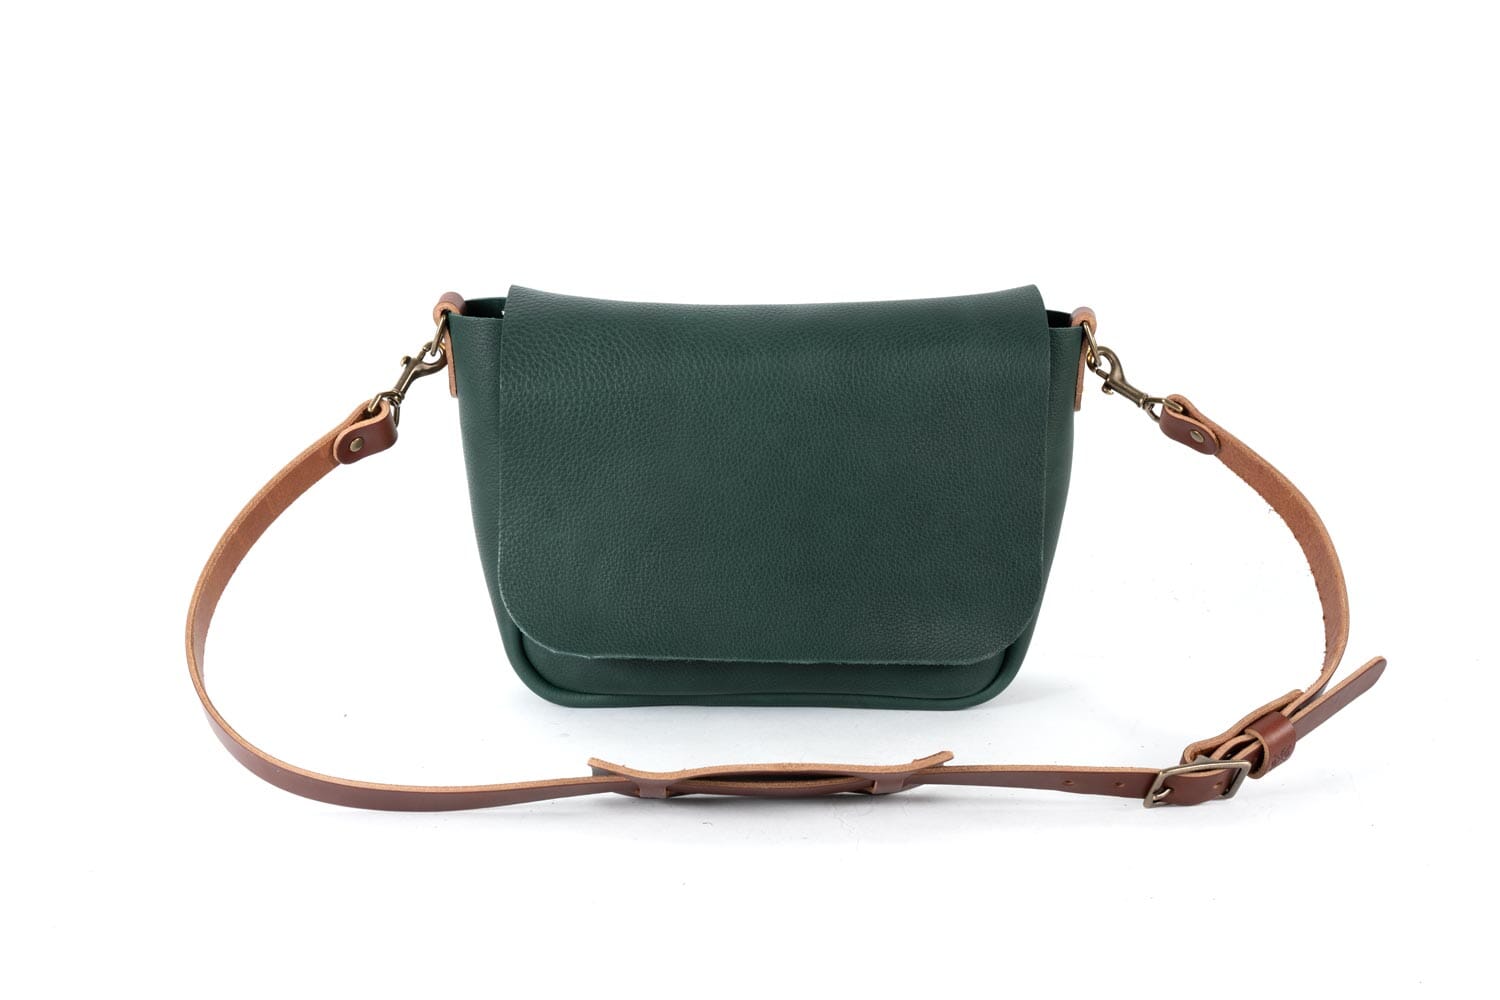 KINDLE LEATHER SATCHEL - FOREST GREEN